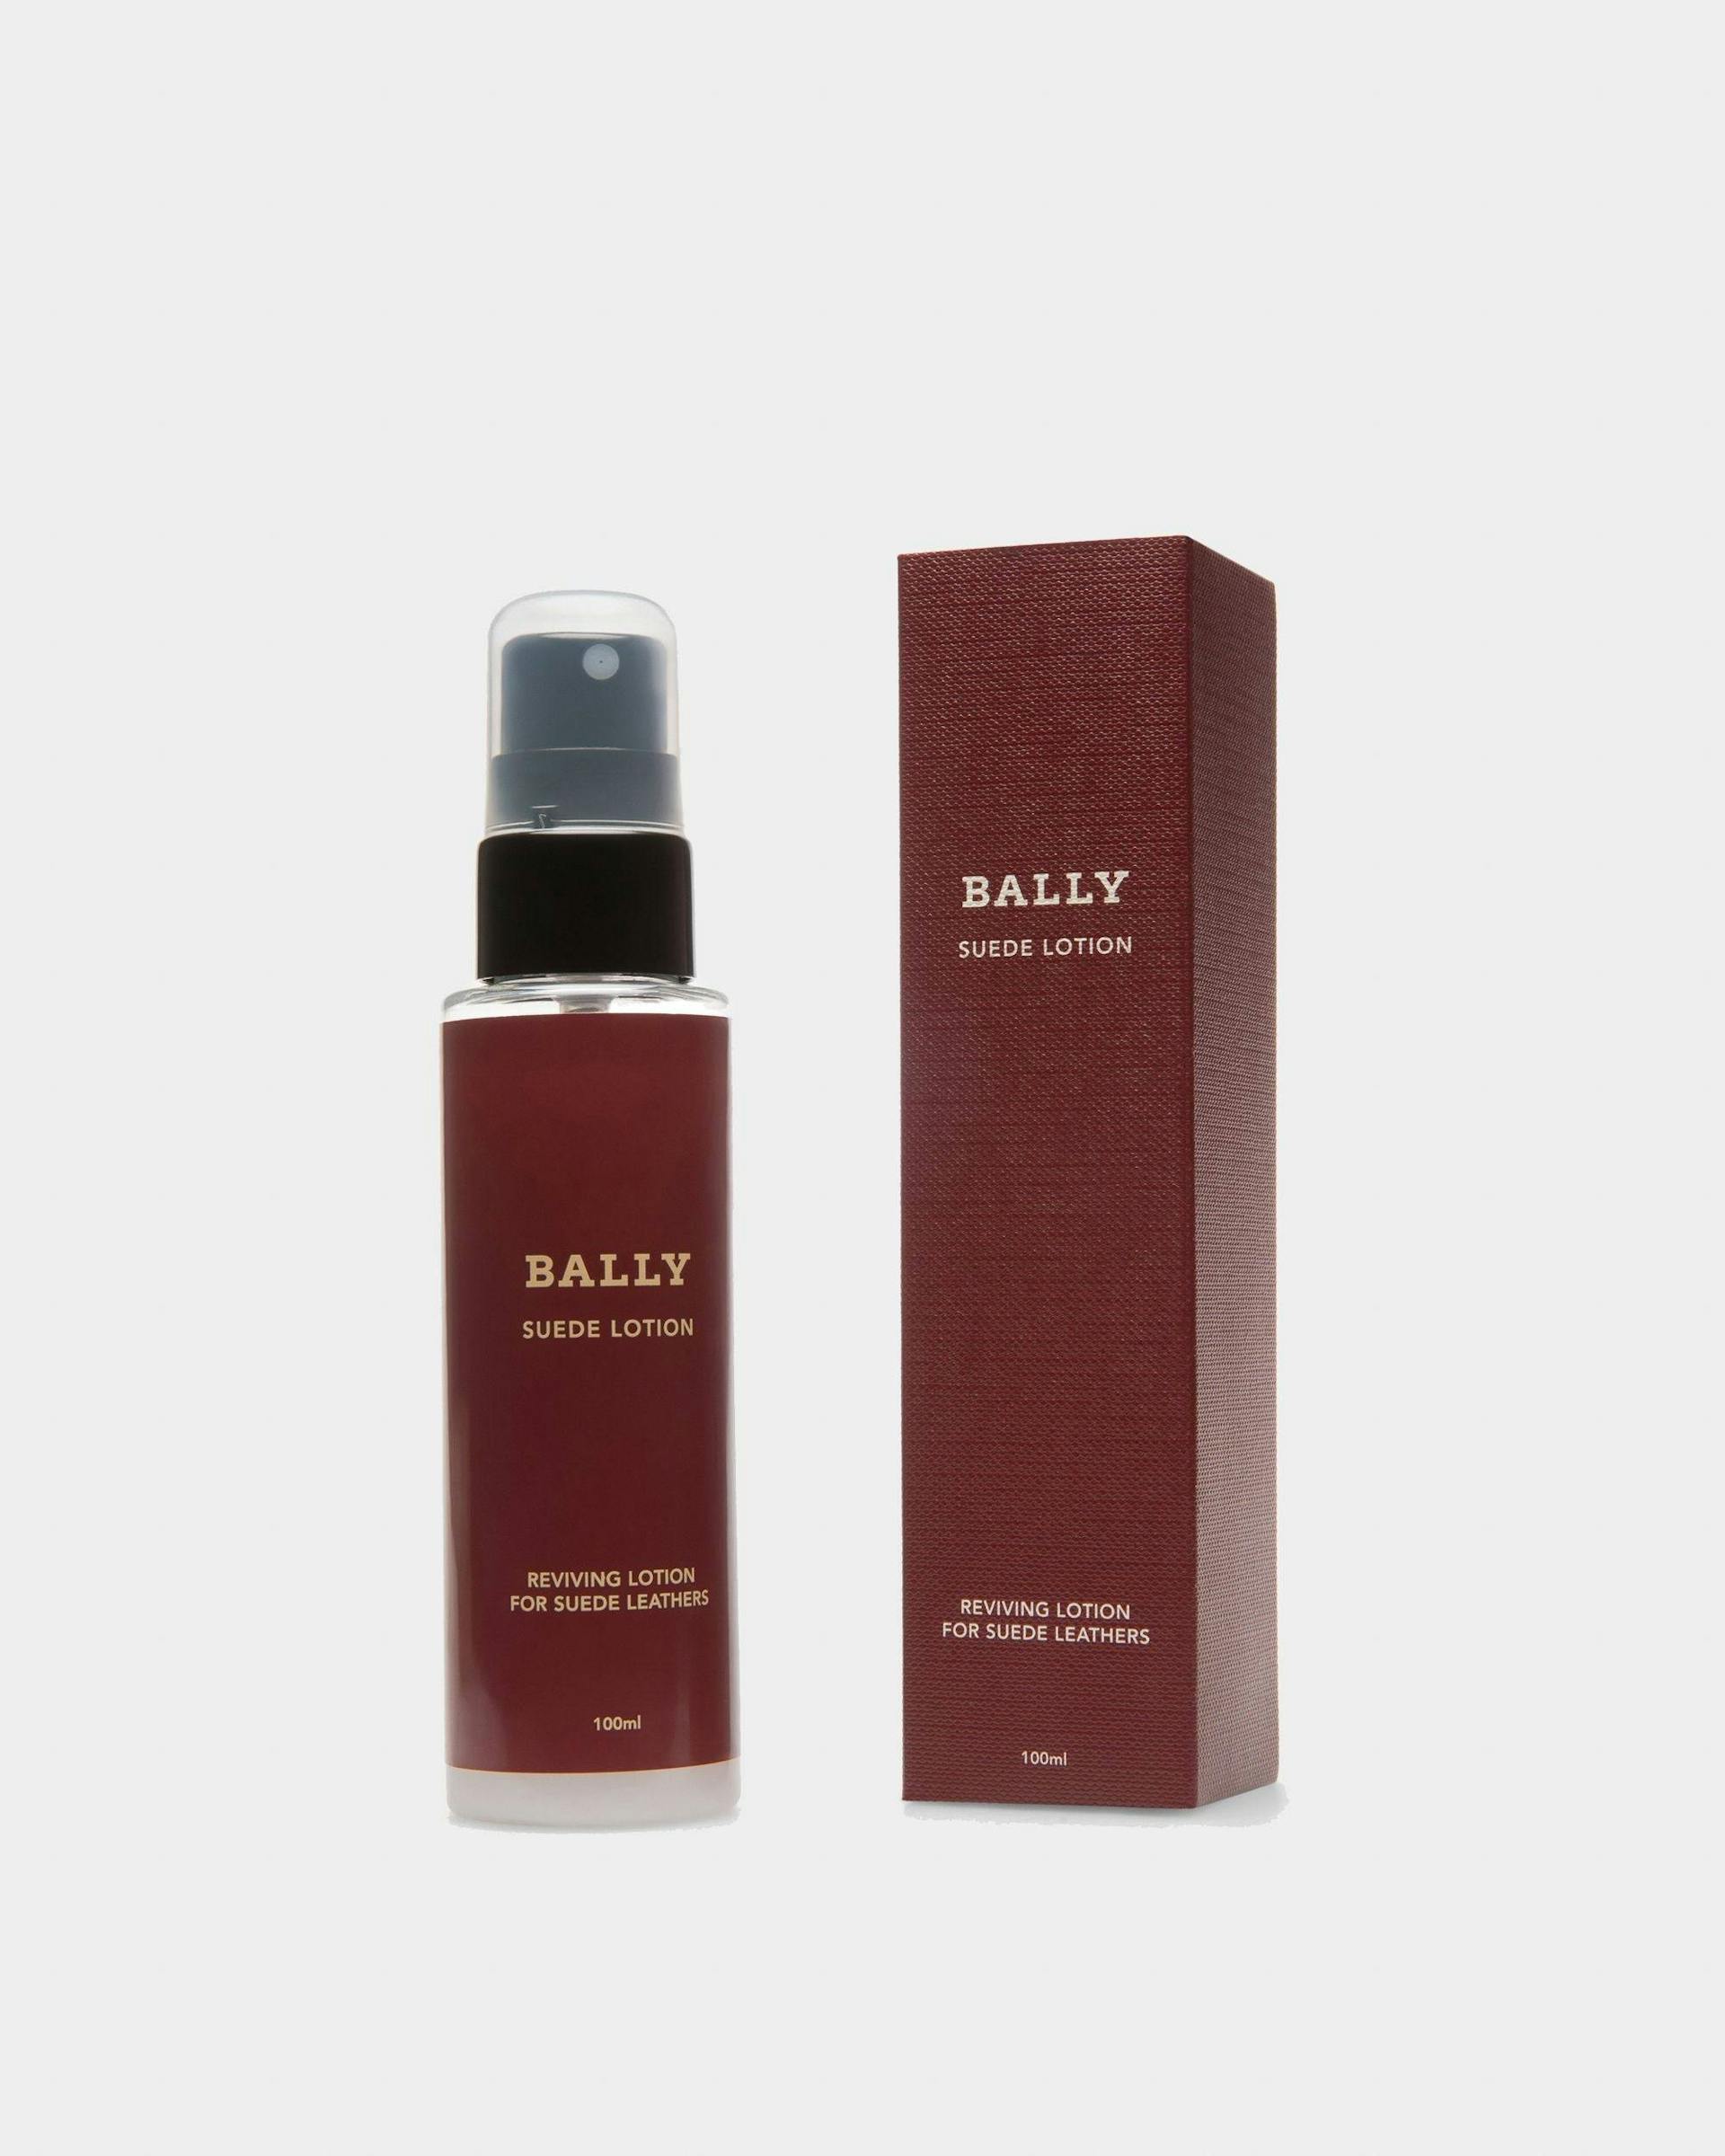 Lotion Shoe Care Accessory For Suede Shoe Care Accessory For Suede - Men's - Bally - 01